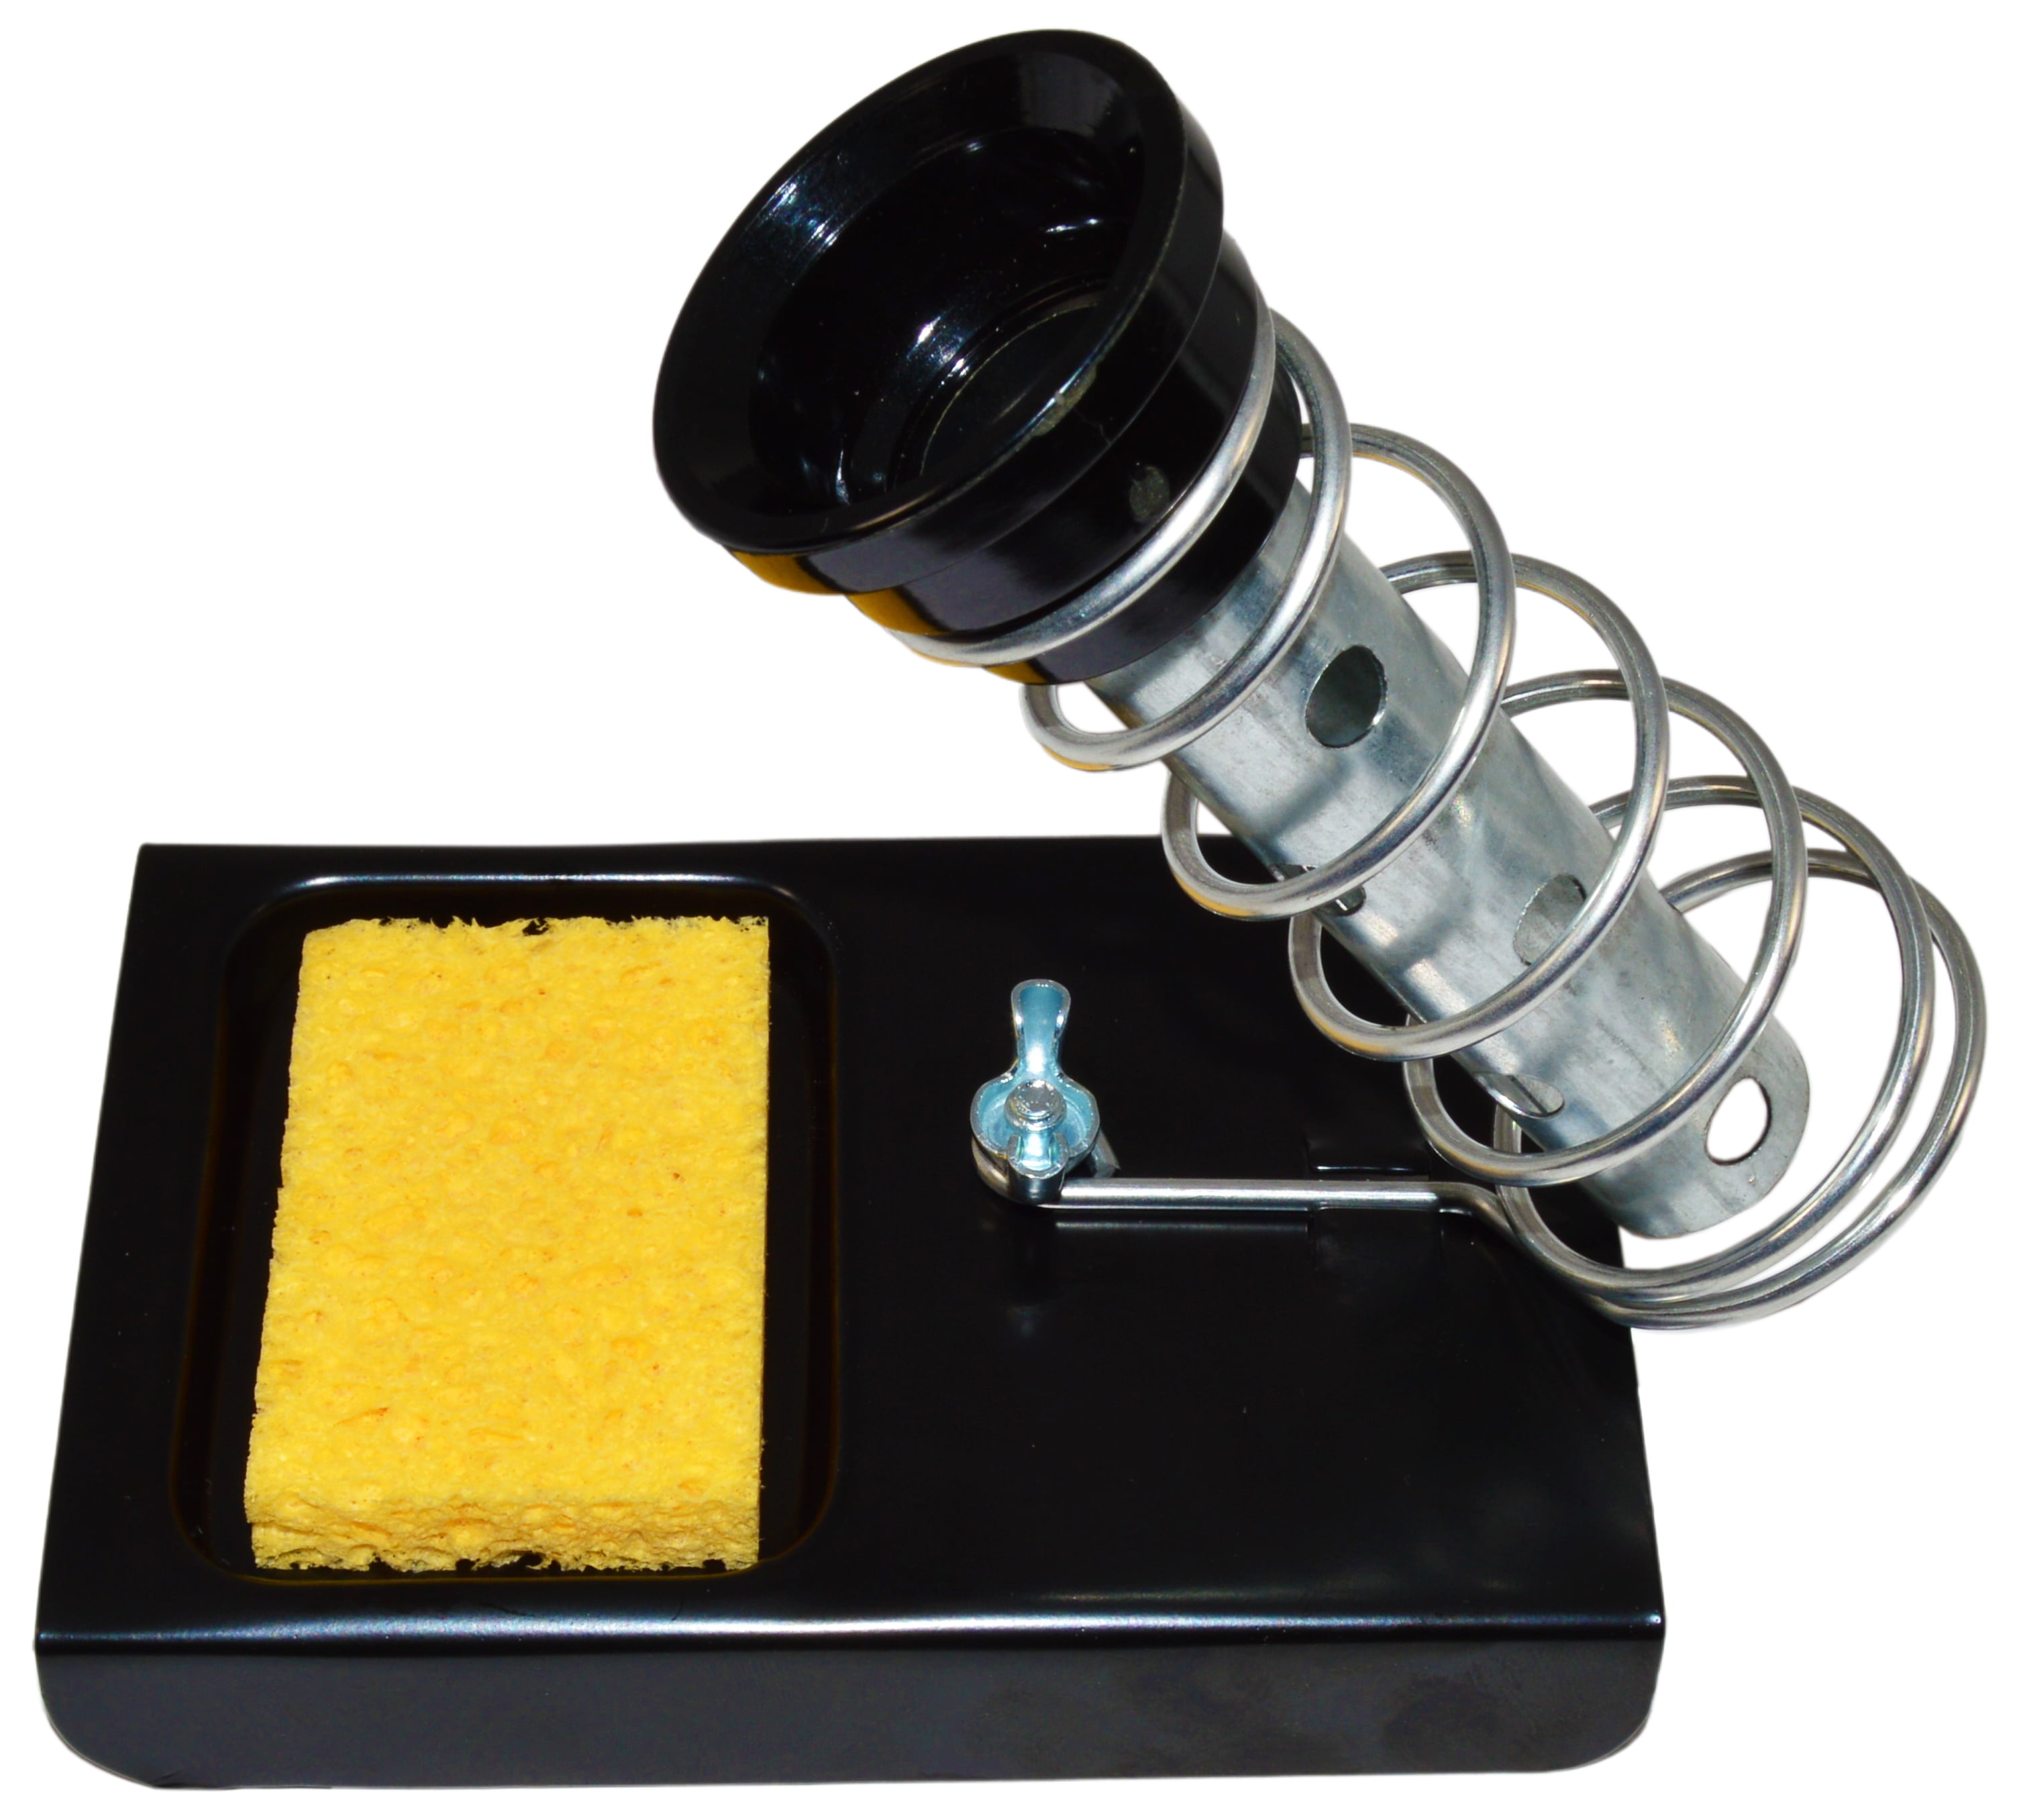 Soldering Iron Stand/Holder with Tip Cleaning Sponge Accommodates Heavy Duty 